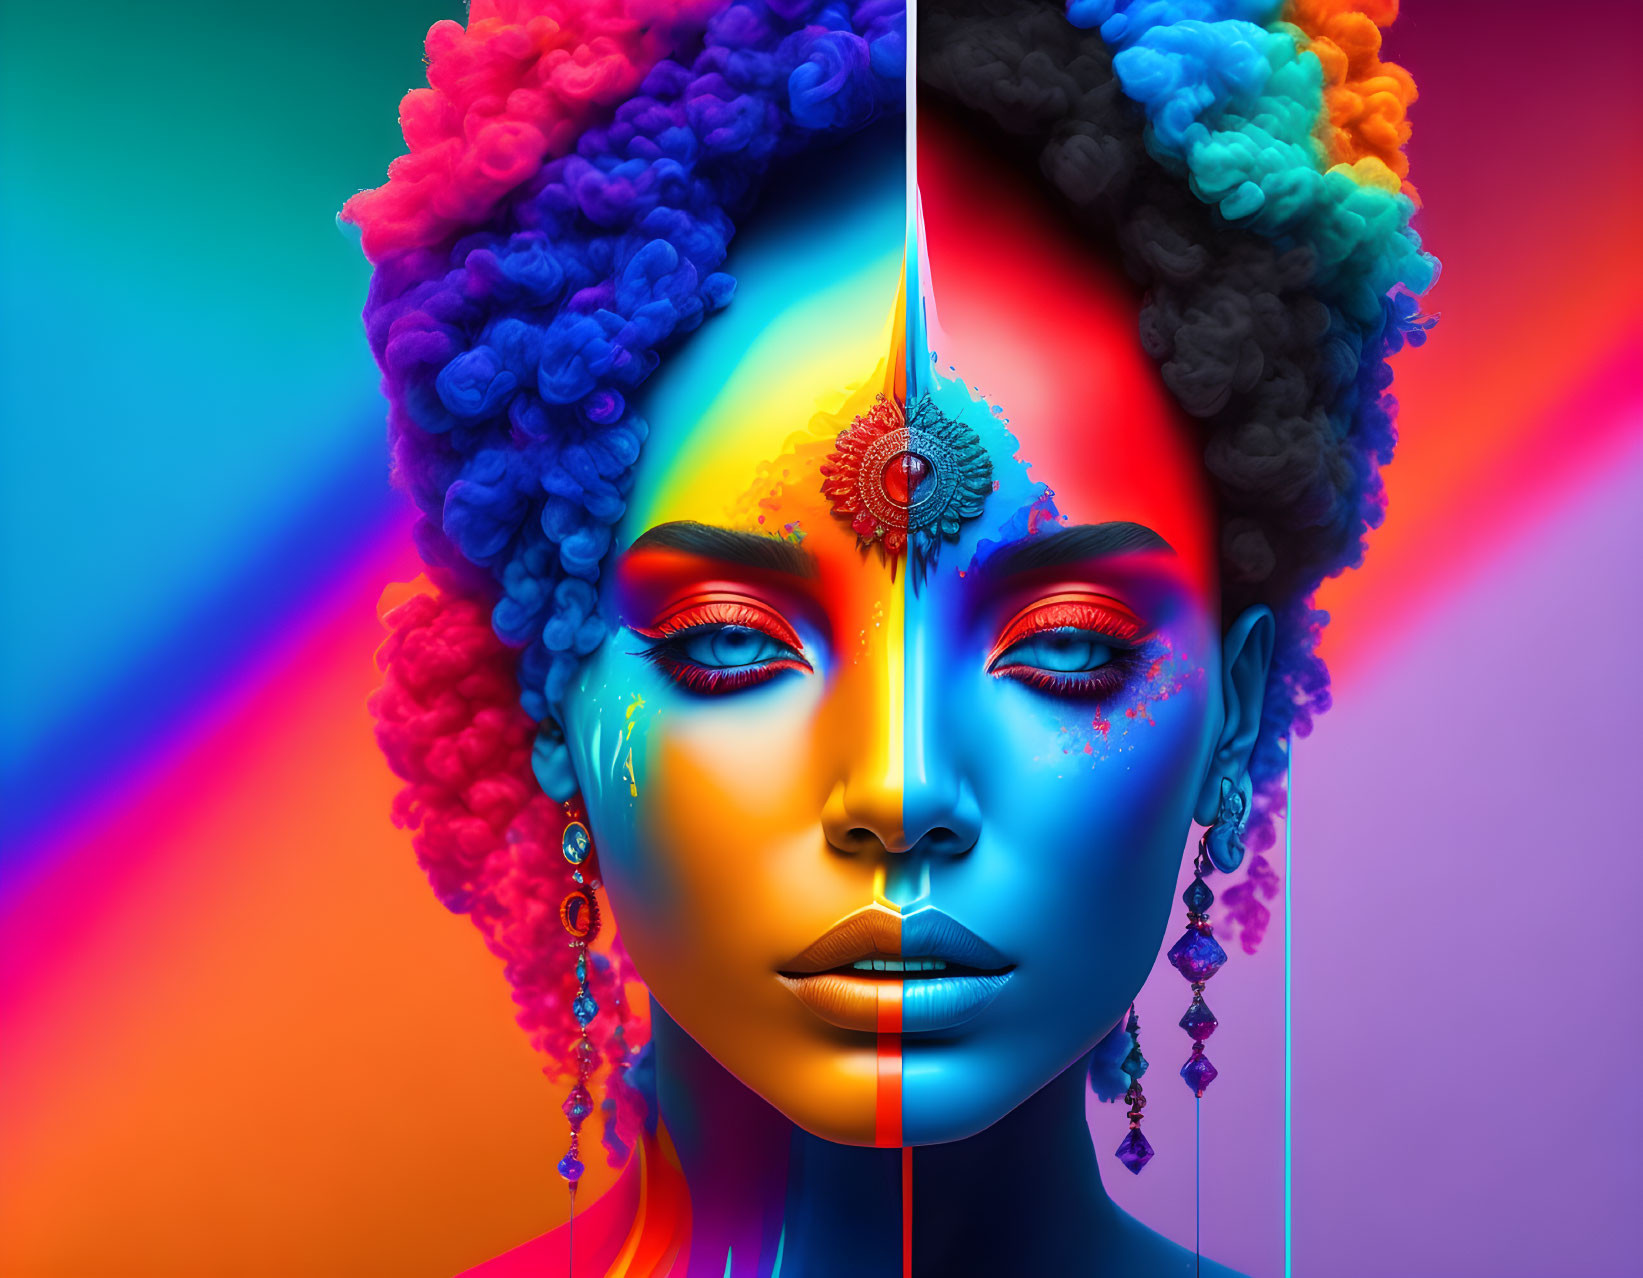 Split-portrait of woman with vibrant makeup and hairstyles on colorful background